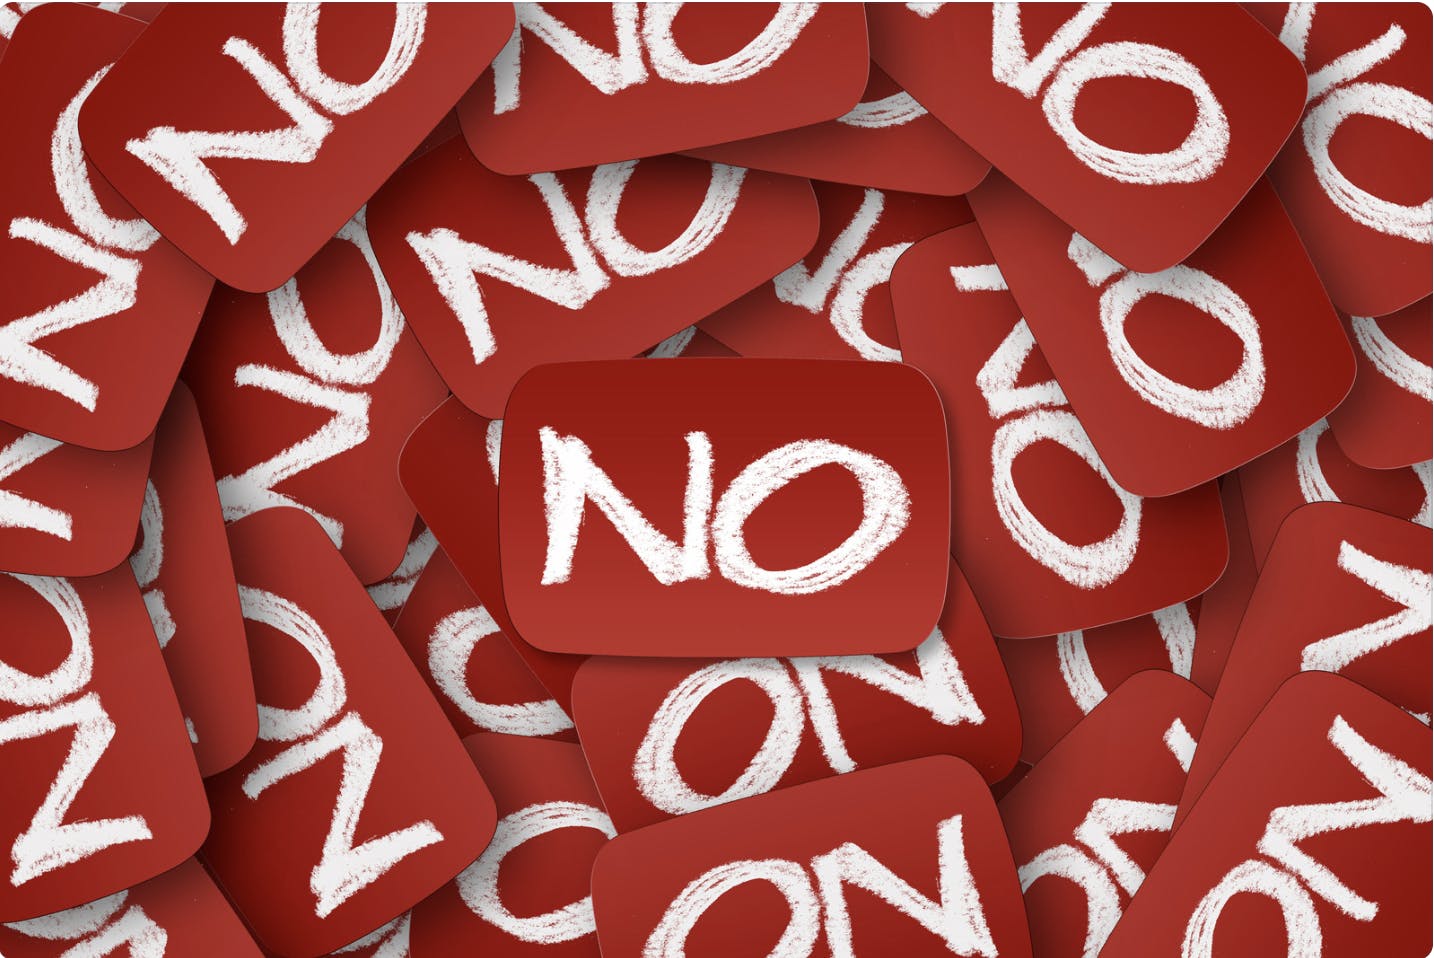 What you need to do in order to say no